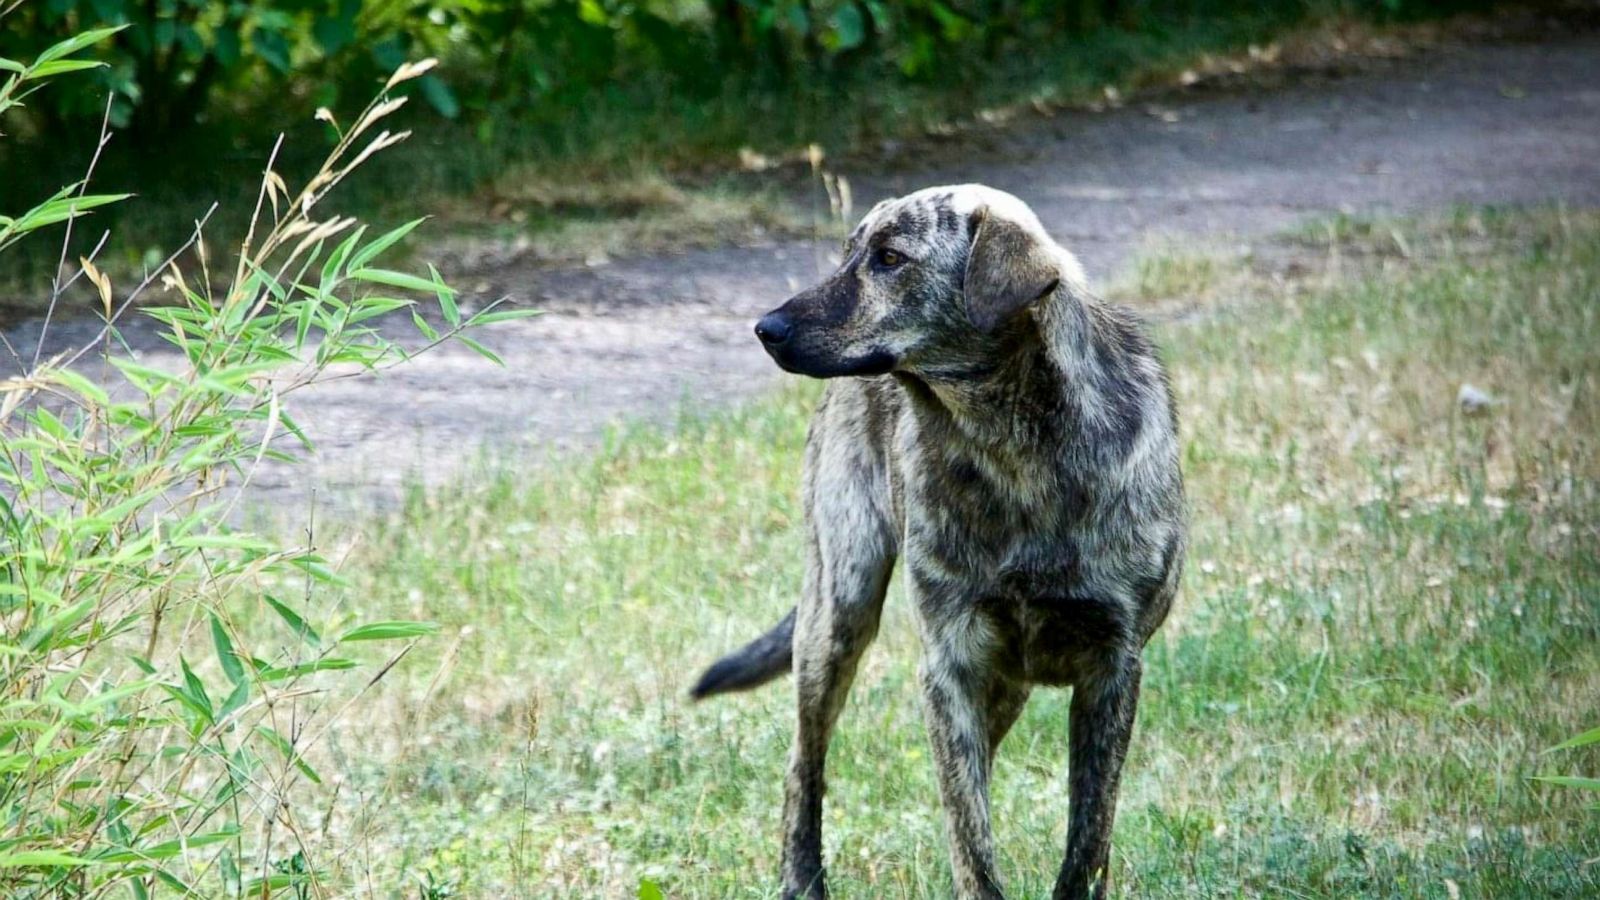 Chernobyl nuclear disaster altered the genetics of the dogs left behind,  scientists say - ABC News